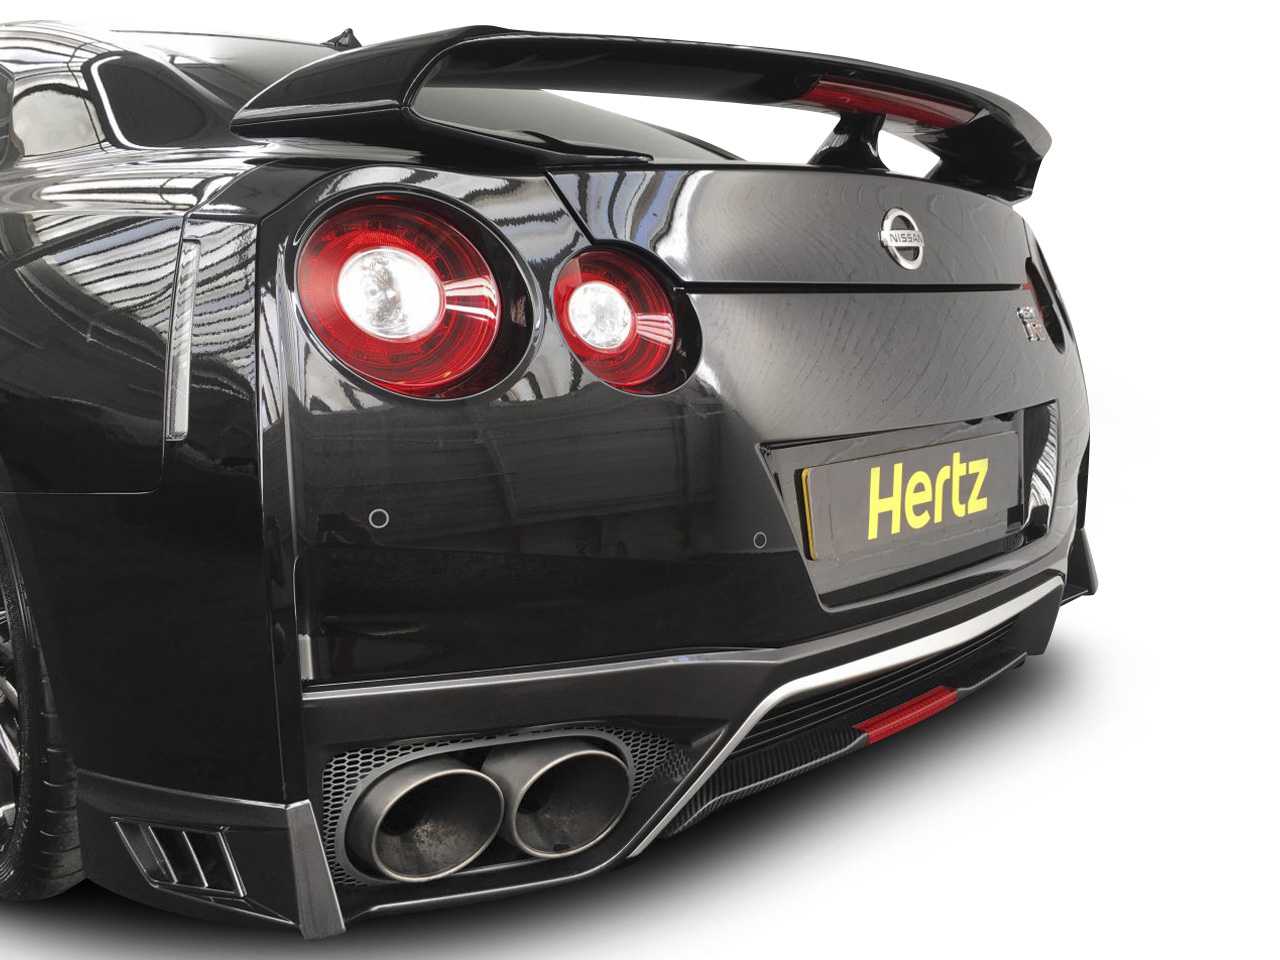 Nissan GT-R luxury Car for hire